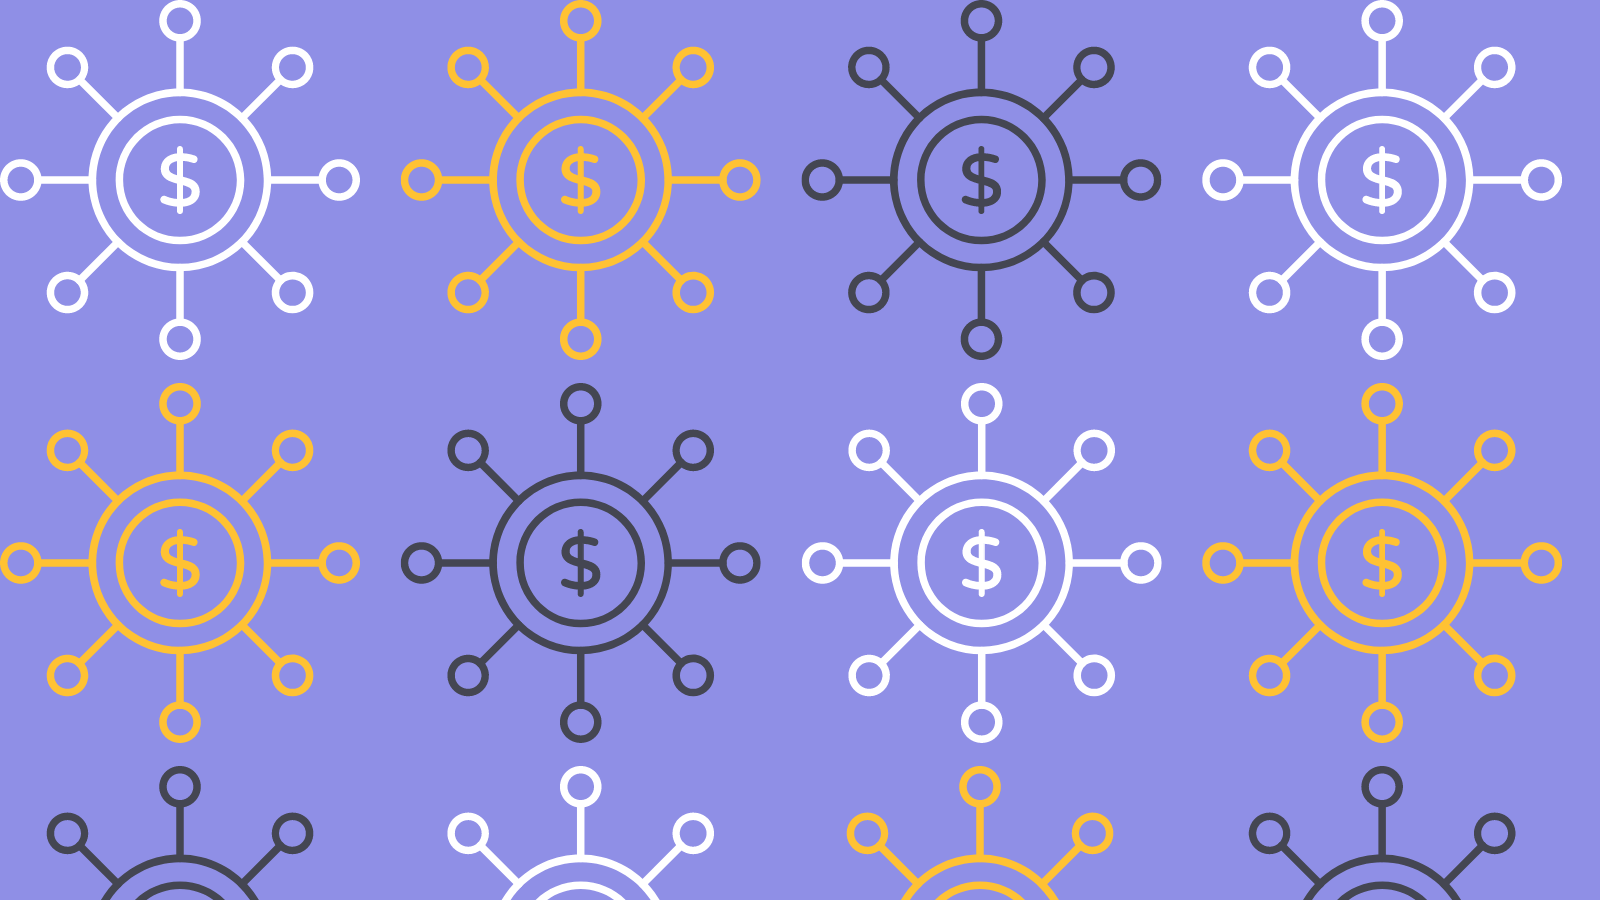 Three rows of a graphic of a spoke diagram with a dollar sign in the center